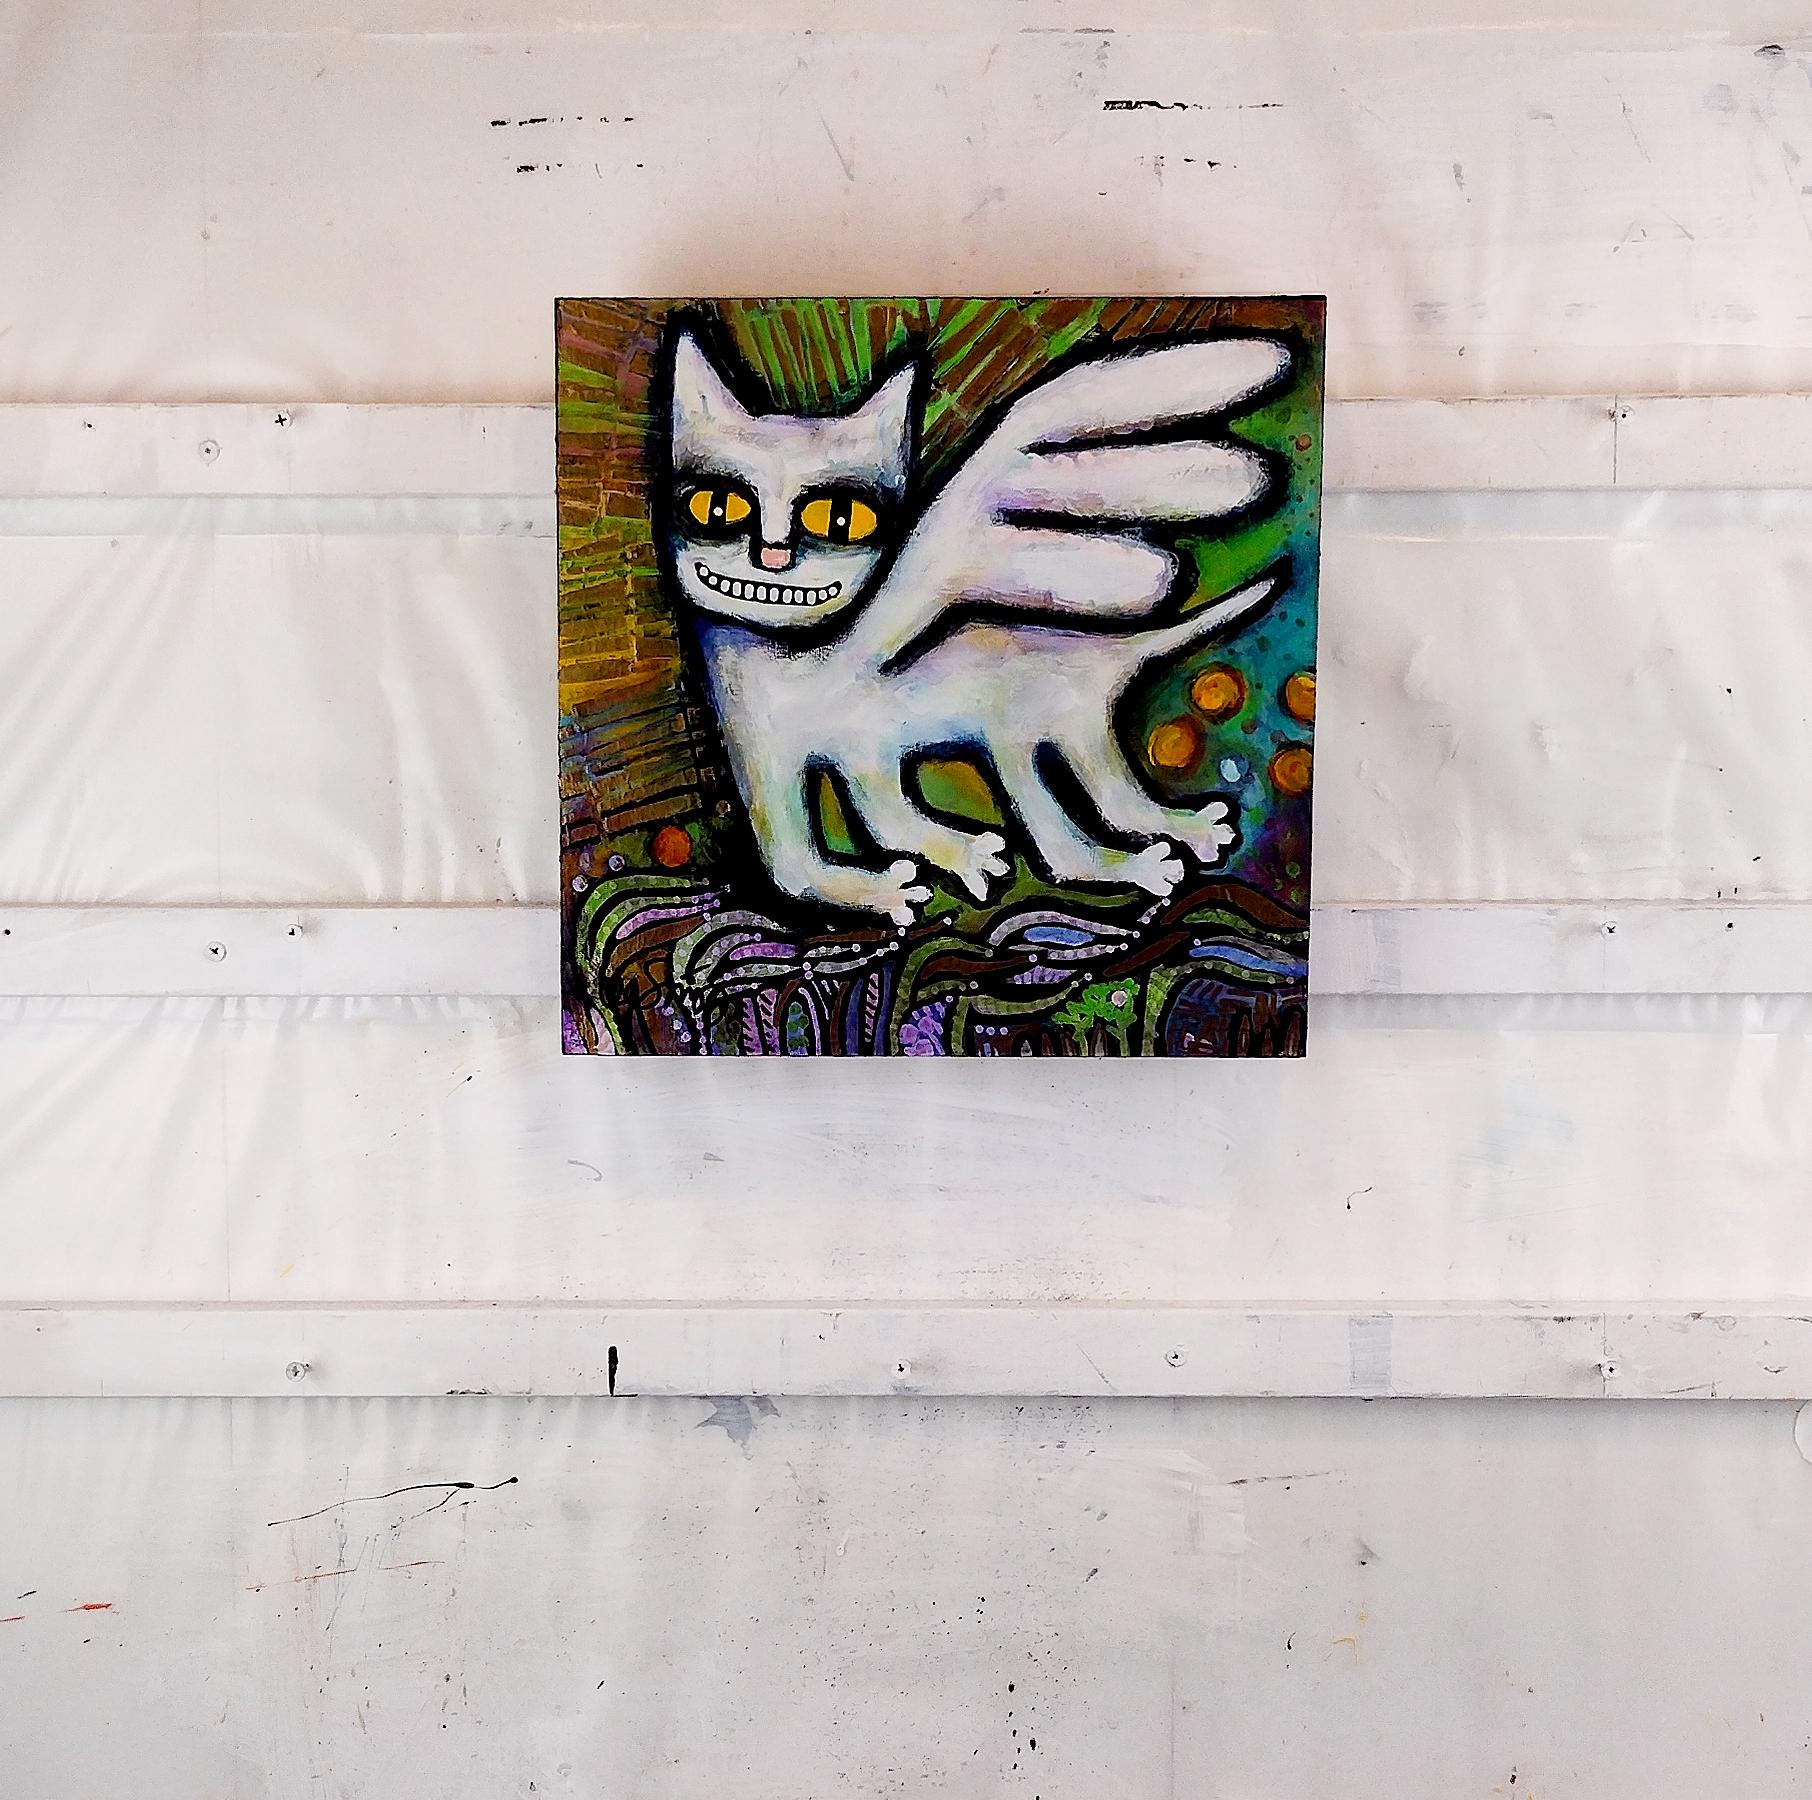 <p>Artist Comments<br>A white-winged cat soars over a forest on its way to heaven. It wears a happy smile and carries a twinkle in its eyes. Bright verdant hues contrast with textured metallic paint and black outlines. Made with acrylic, markers,